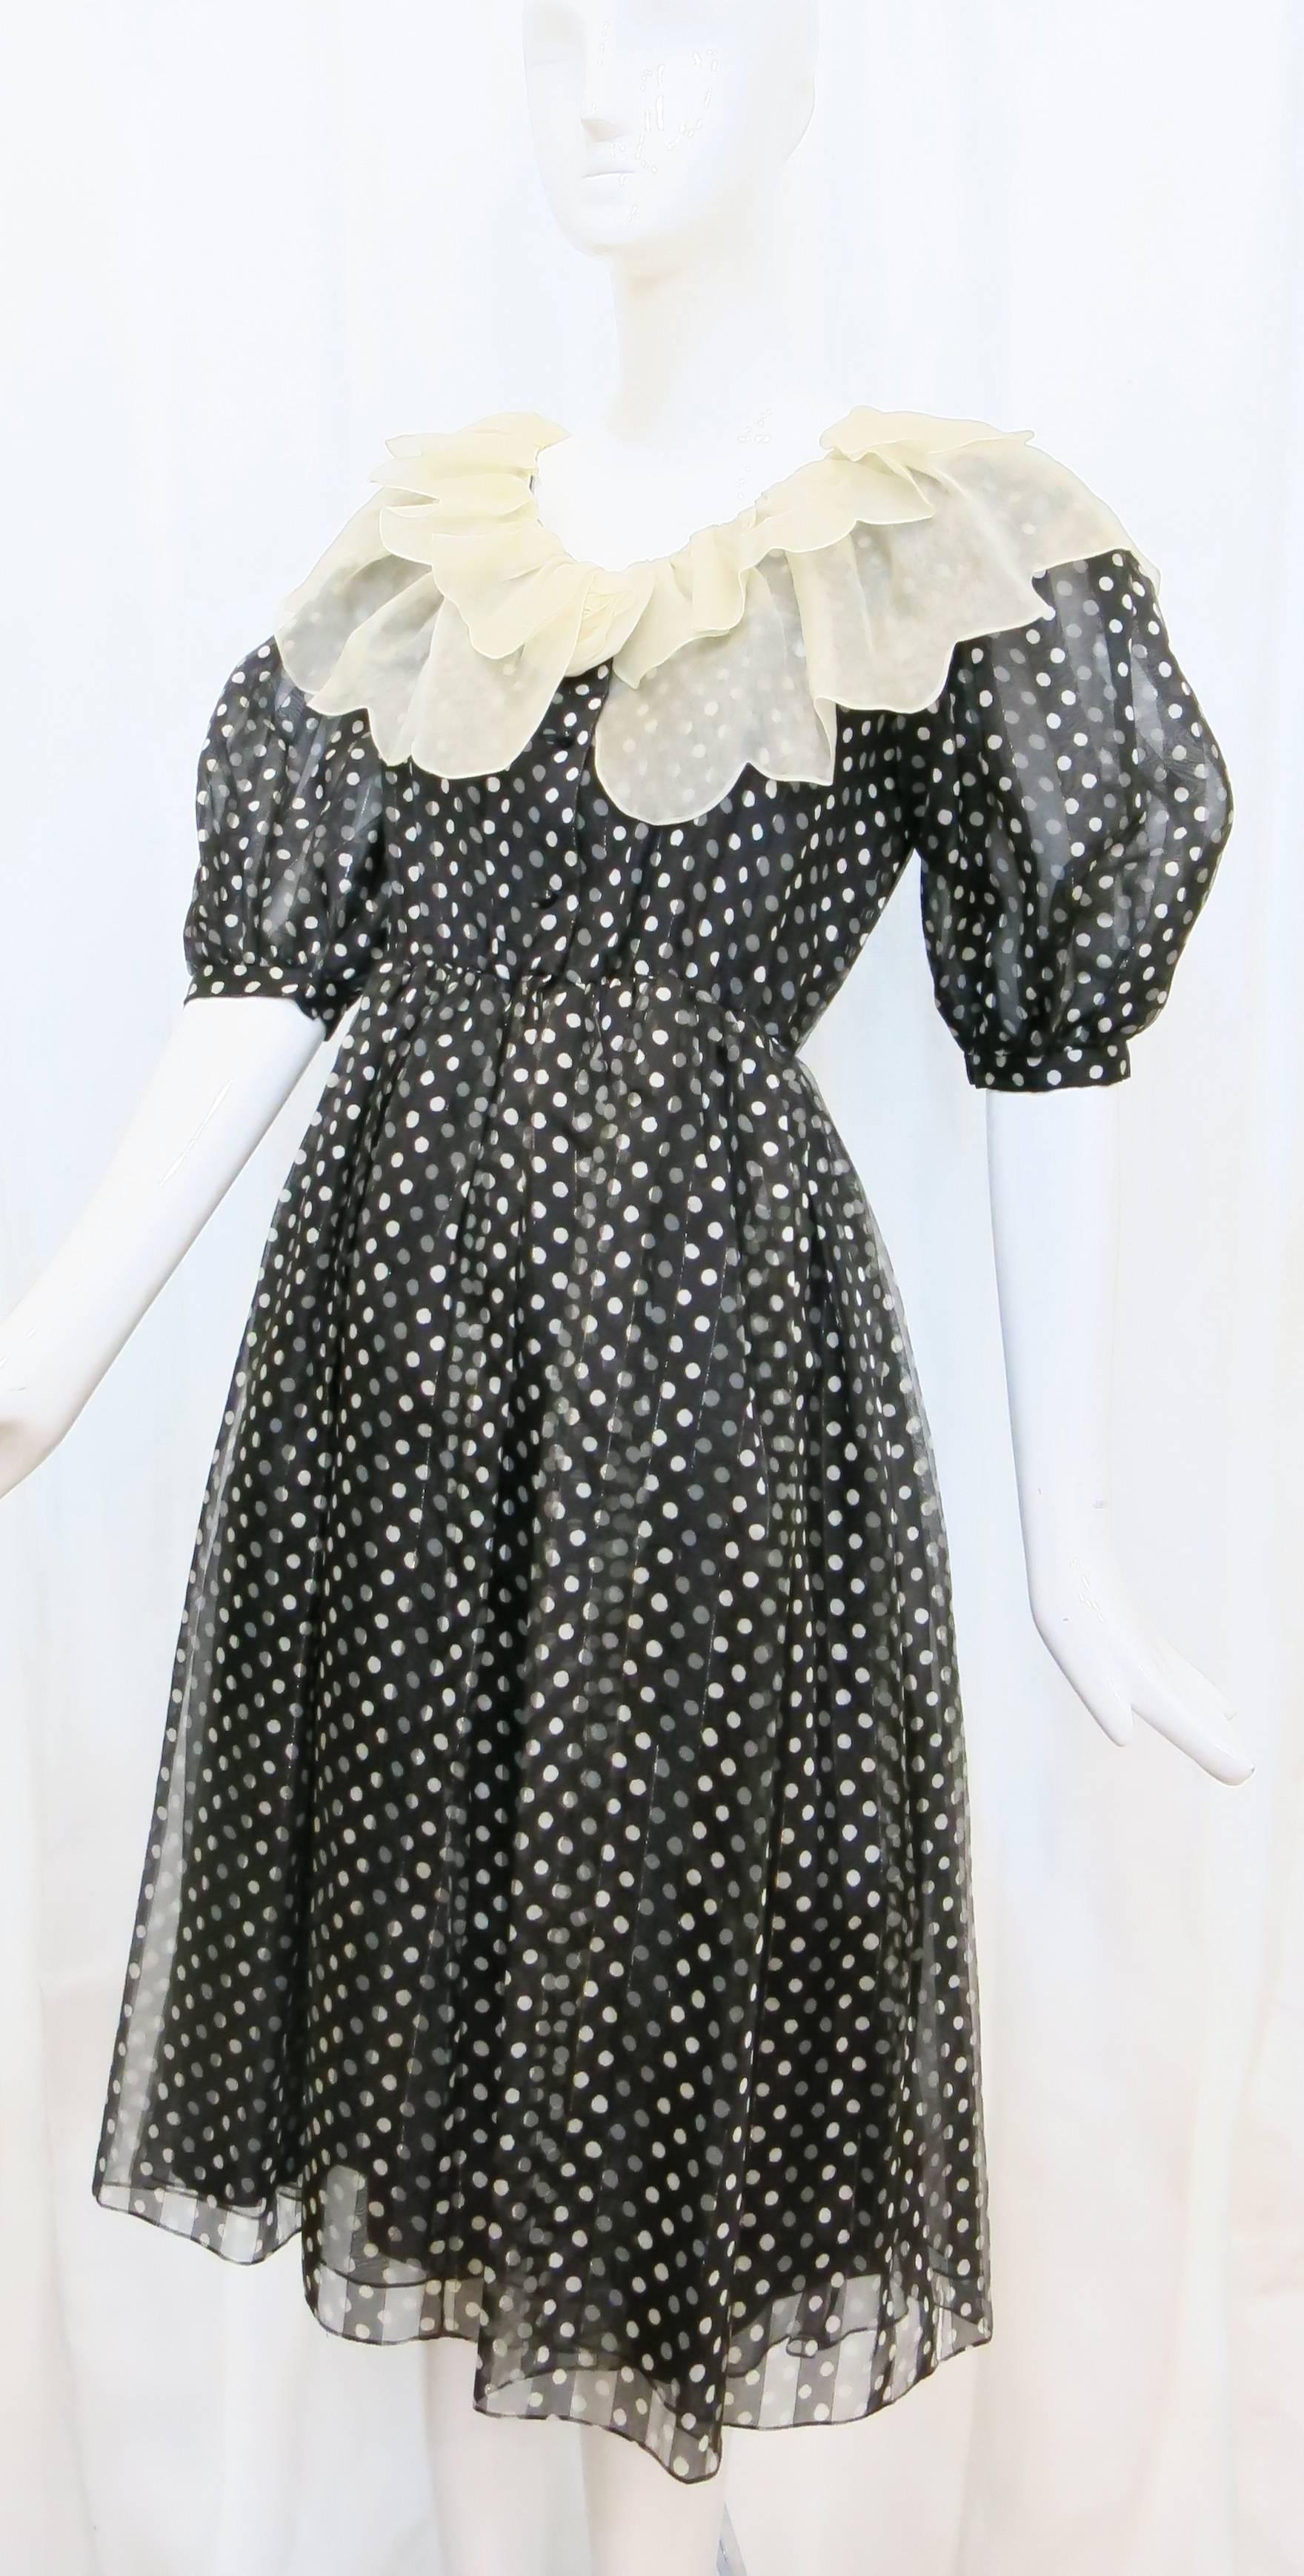 Black button down silk dress with scalloped collar and 1/2 sleeves. Sheer outer layer with solid black lining. Hits right below the knee. A perfect dress to wear to summertime weddings, cocktail parties or the office as it is airy and not too heavy.